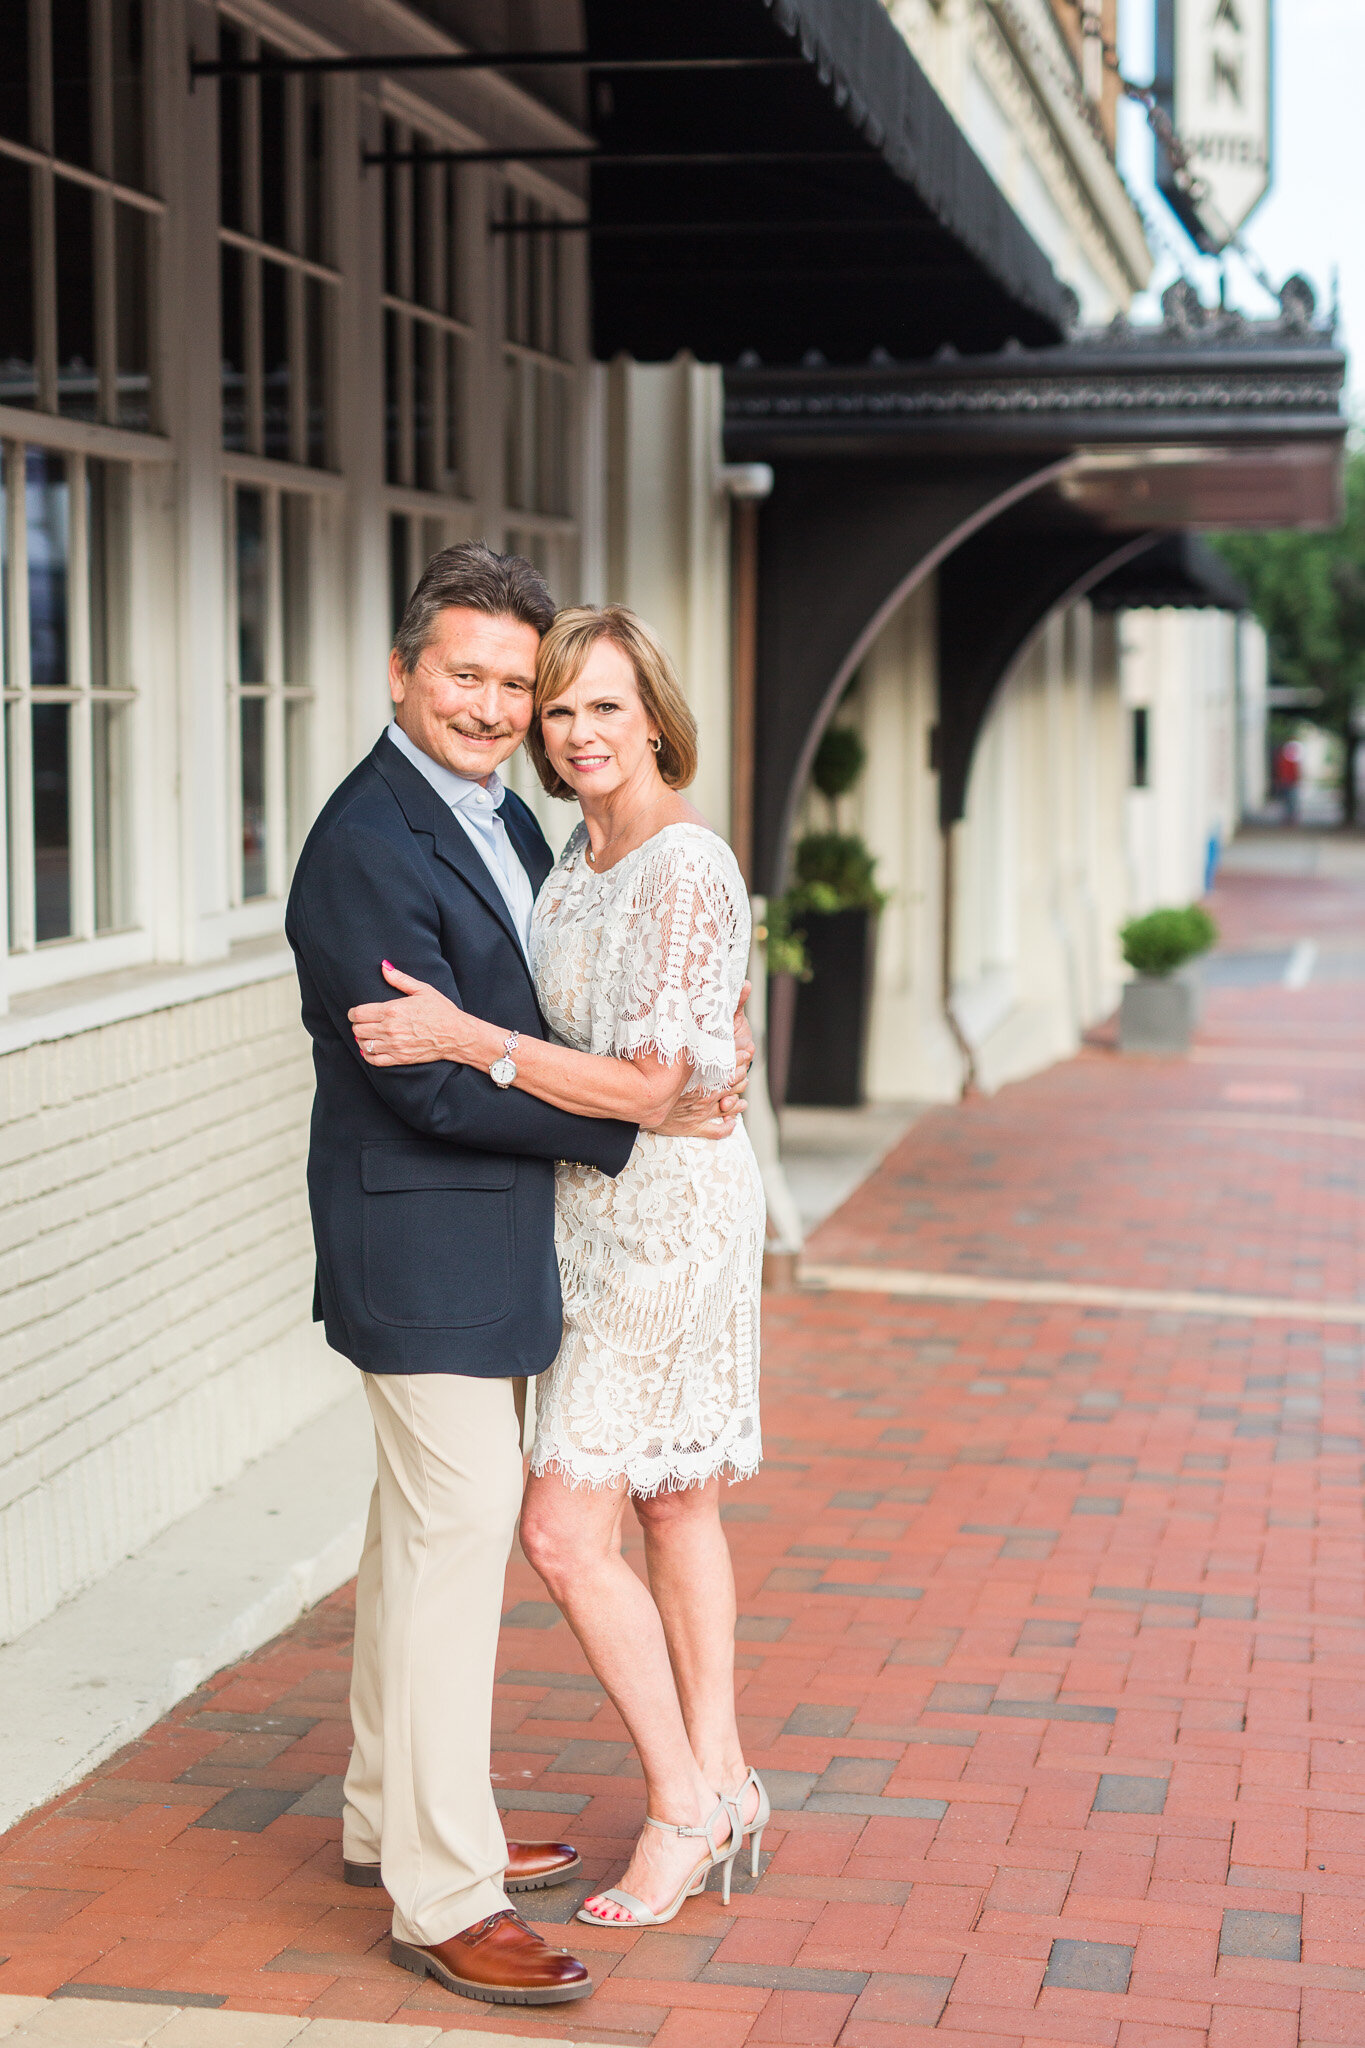 Summer Engagement Session at The Virginian Hotel in Downtown Lynchburg, Virginia || Central Virginia Wedding and Engagement Photographer 